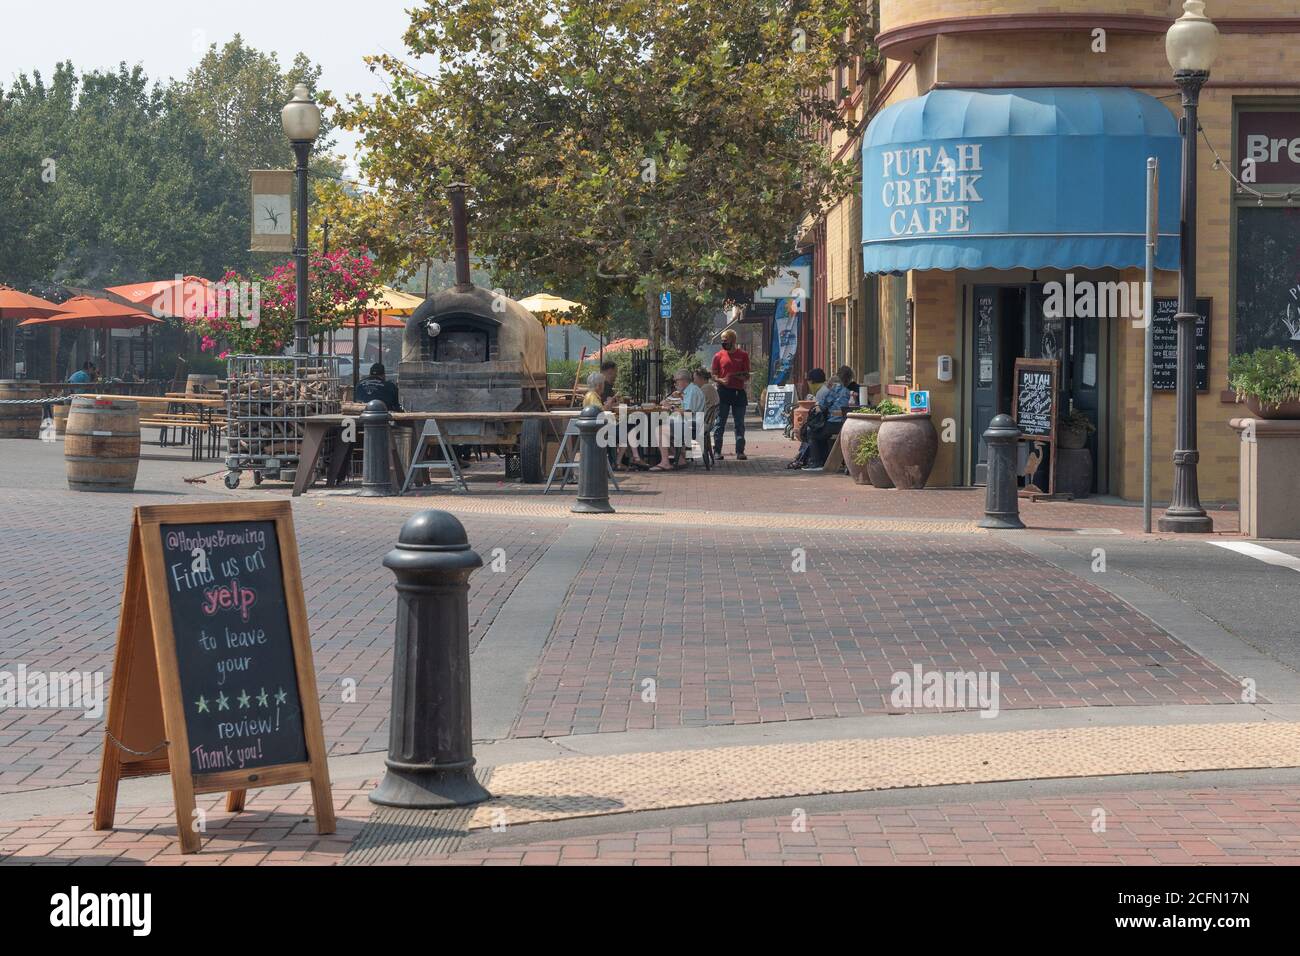 Winters, California, USA, 6 September 2020. The main street of this town was transformed into an open restaurant, yet at 1 pm on Labor Day sunday there are very few custommers. The heat, the smoke from wildfires and the pandemics have chasent custommers away. Stock Photo